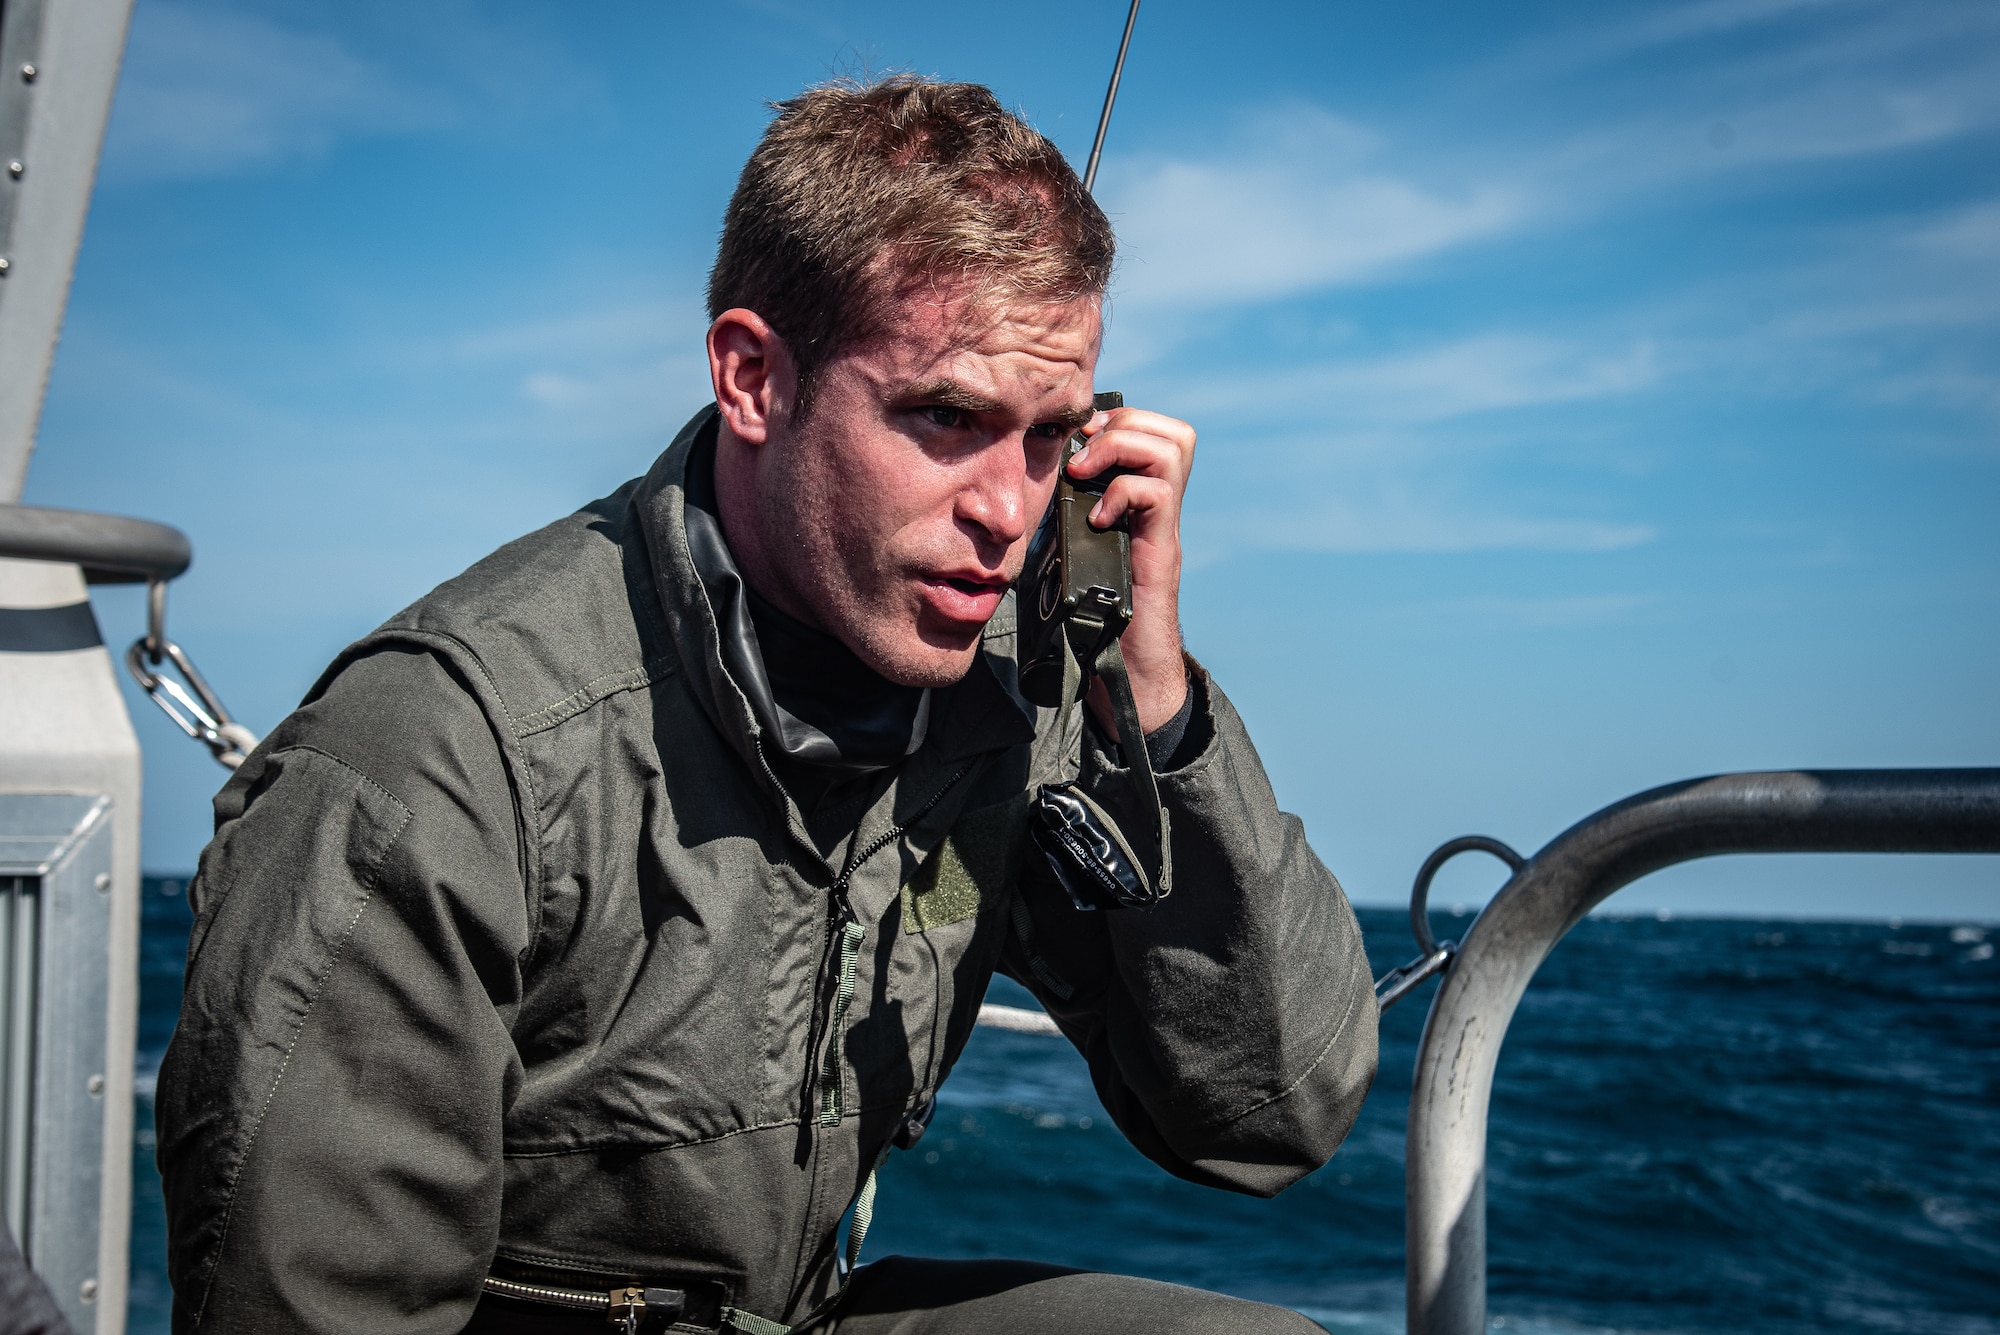 U.S. Air Force Capt. Kyle Rasmussen, 55th Fighter Squadron pilot, makes a mayday call during a search-and-recovery exercise off the coast of Tybee Island Coast Guard Station, Georgia, June 21. 2019.